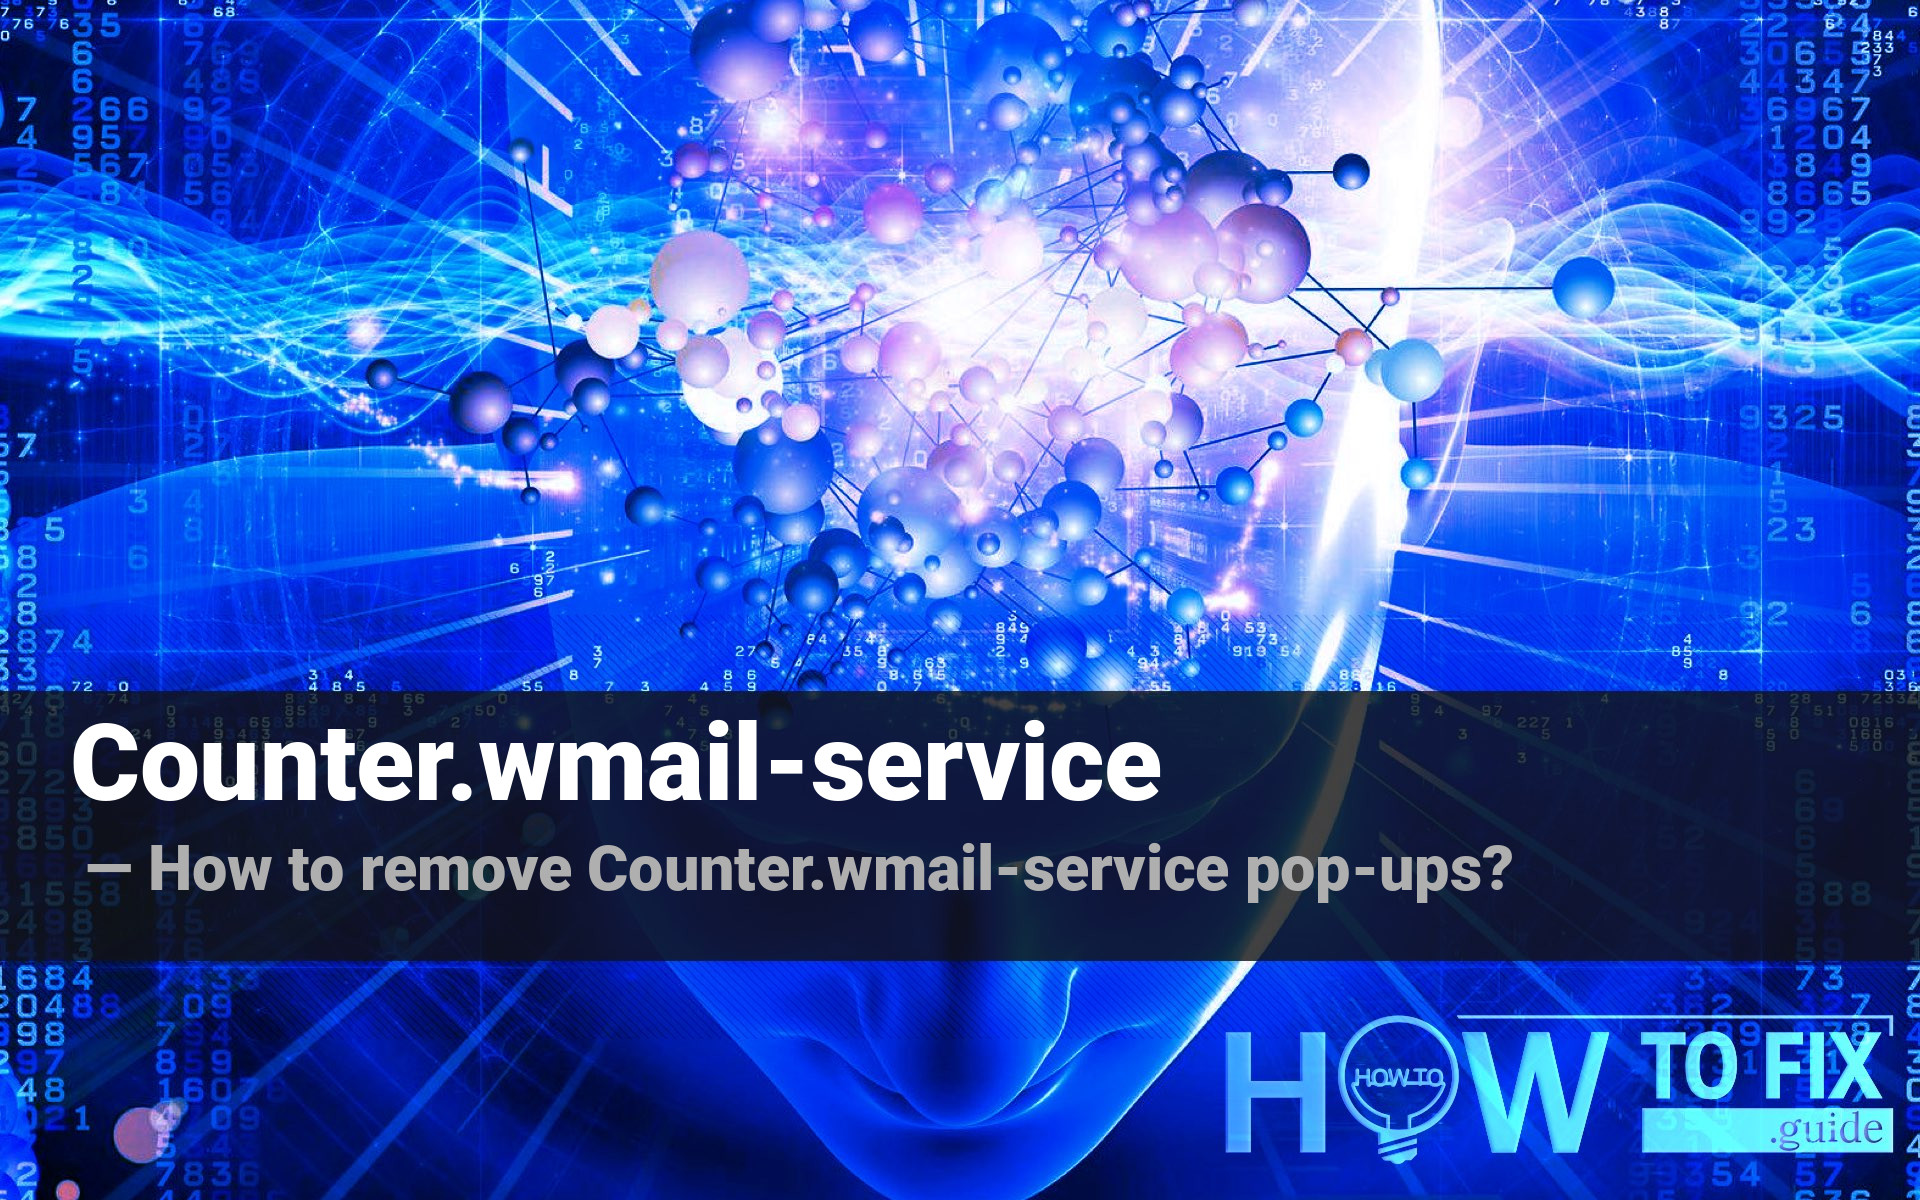 Counter wmail service